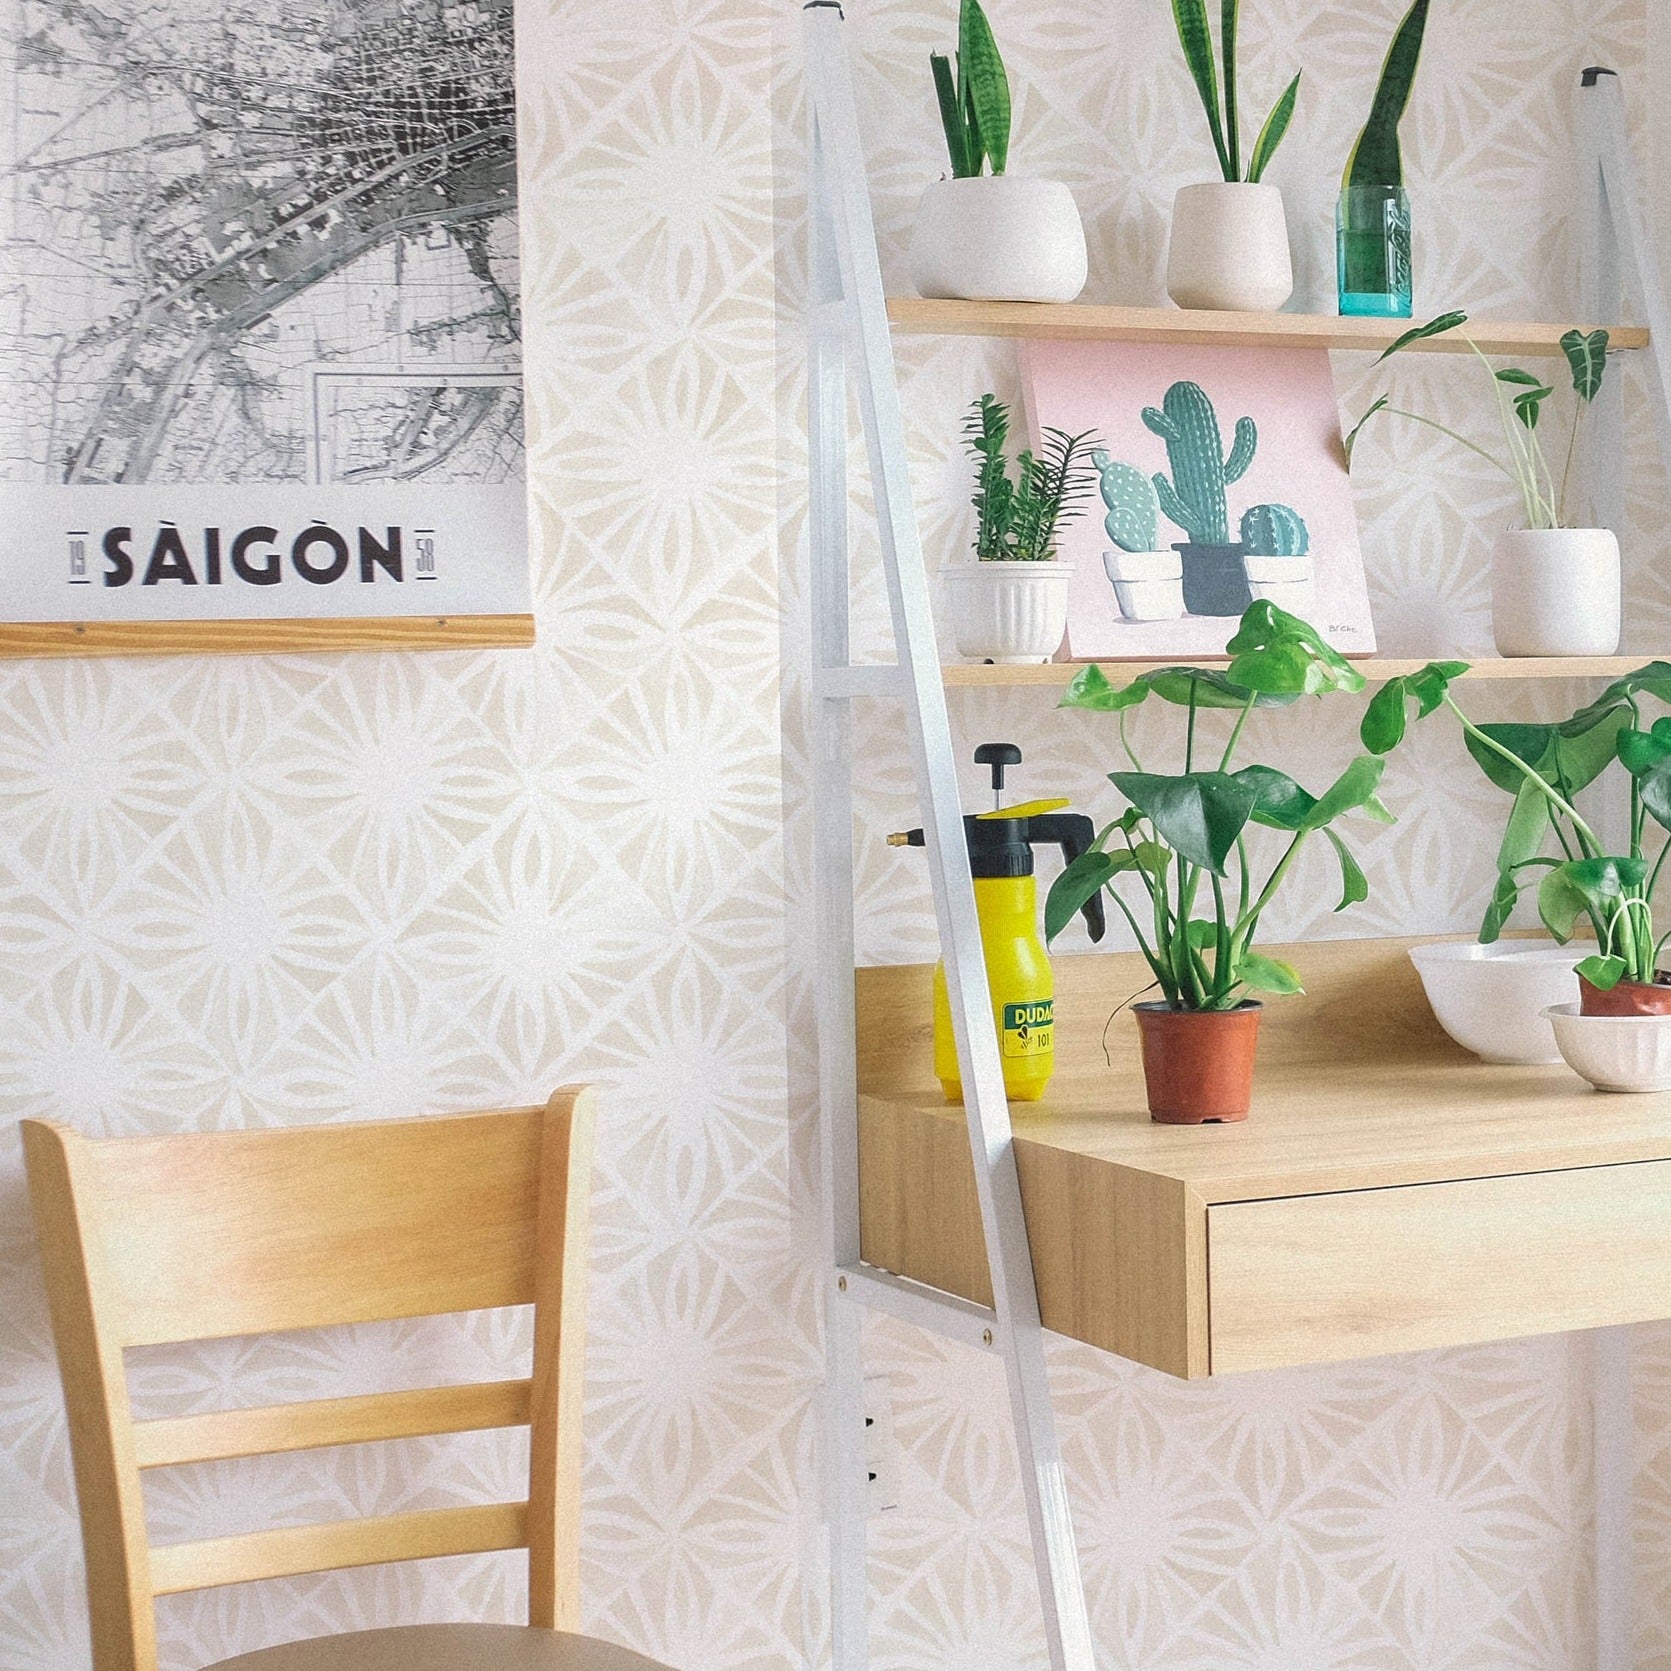 A bright, airy corner of a room is accented by the Moroccan Tile Wallpaper II - Ecru, featuring a geometric design that gives a modern twist to traditional Moroccan tiles. The neutral wallpaper tones are paired with houseplants and a wooden workspace, creating a calm and inviting area for relaxation or creativity.